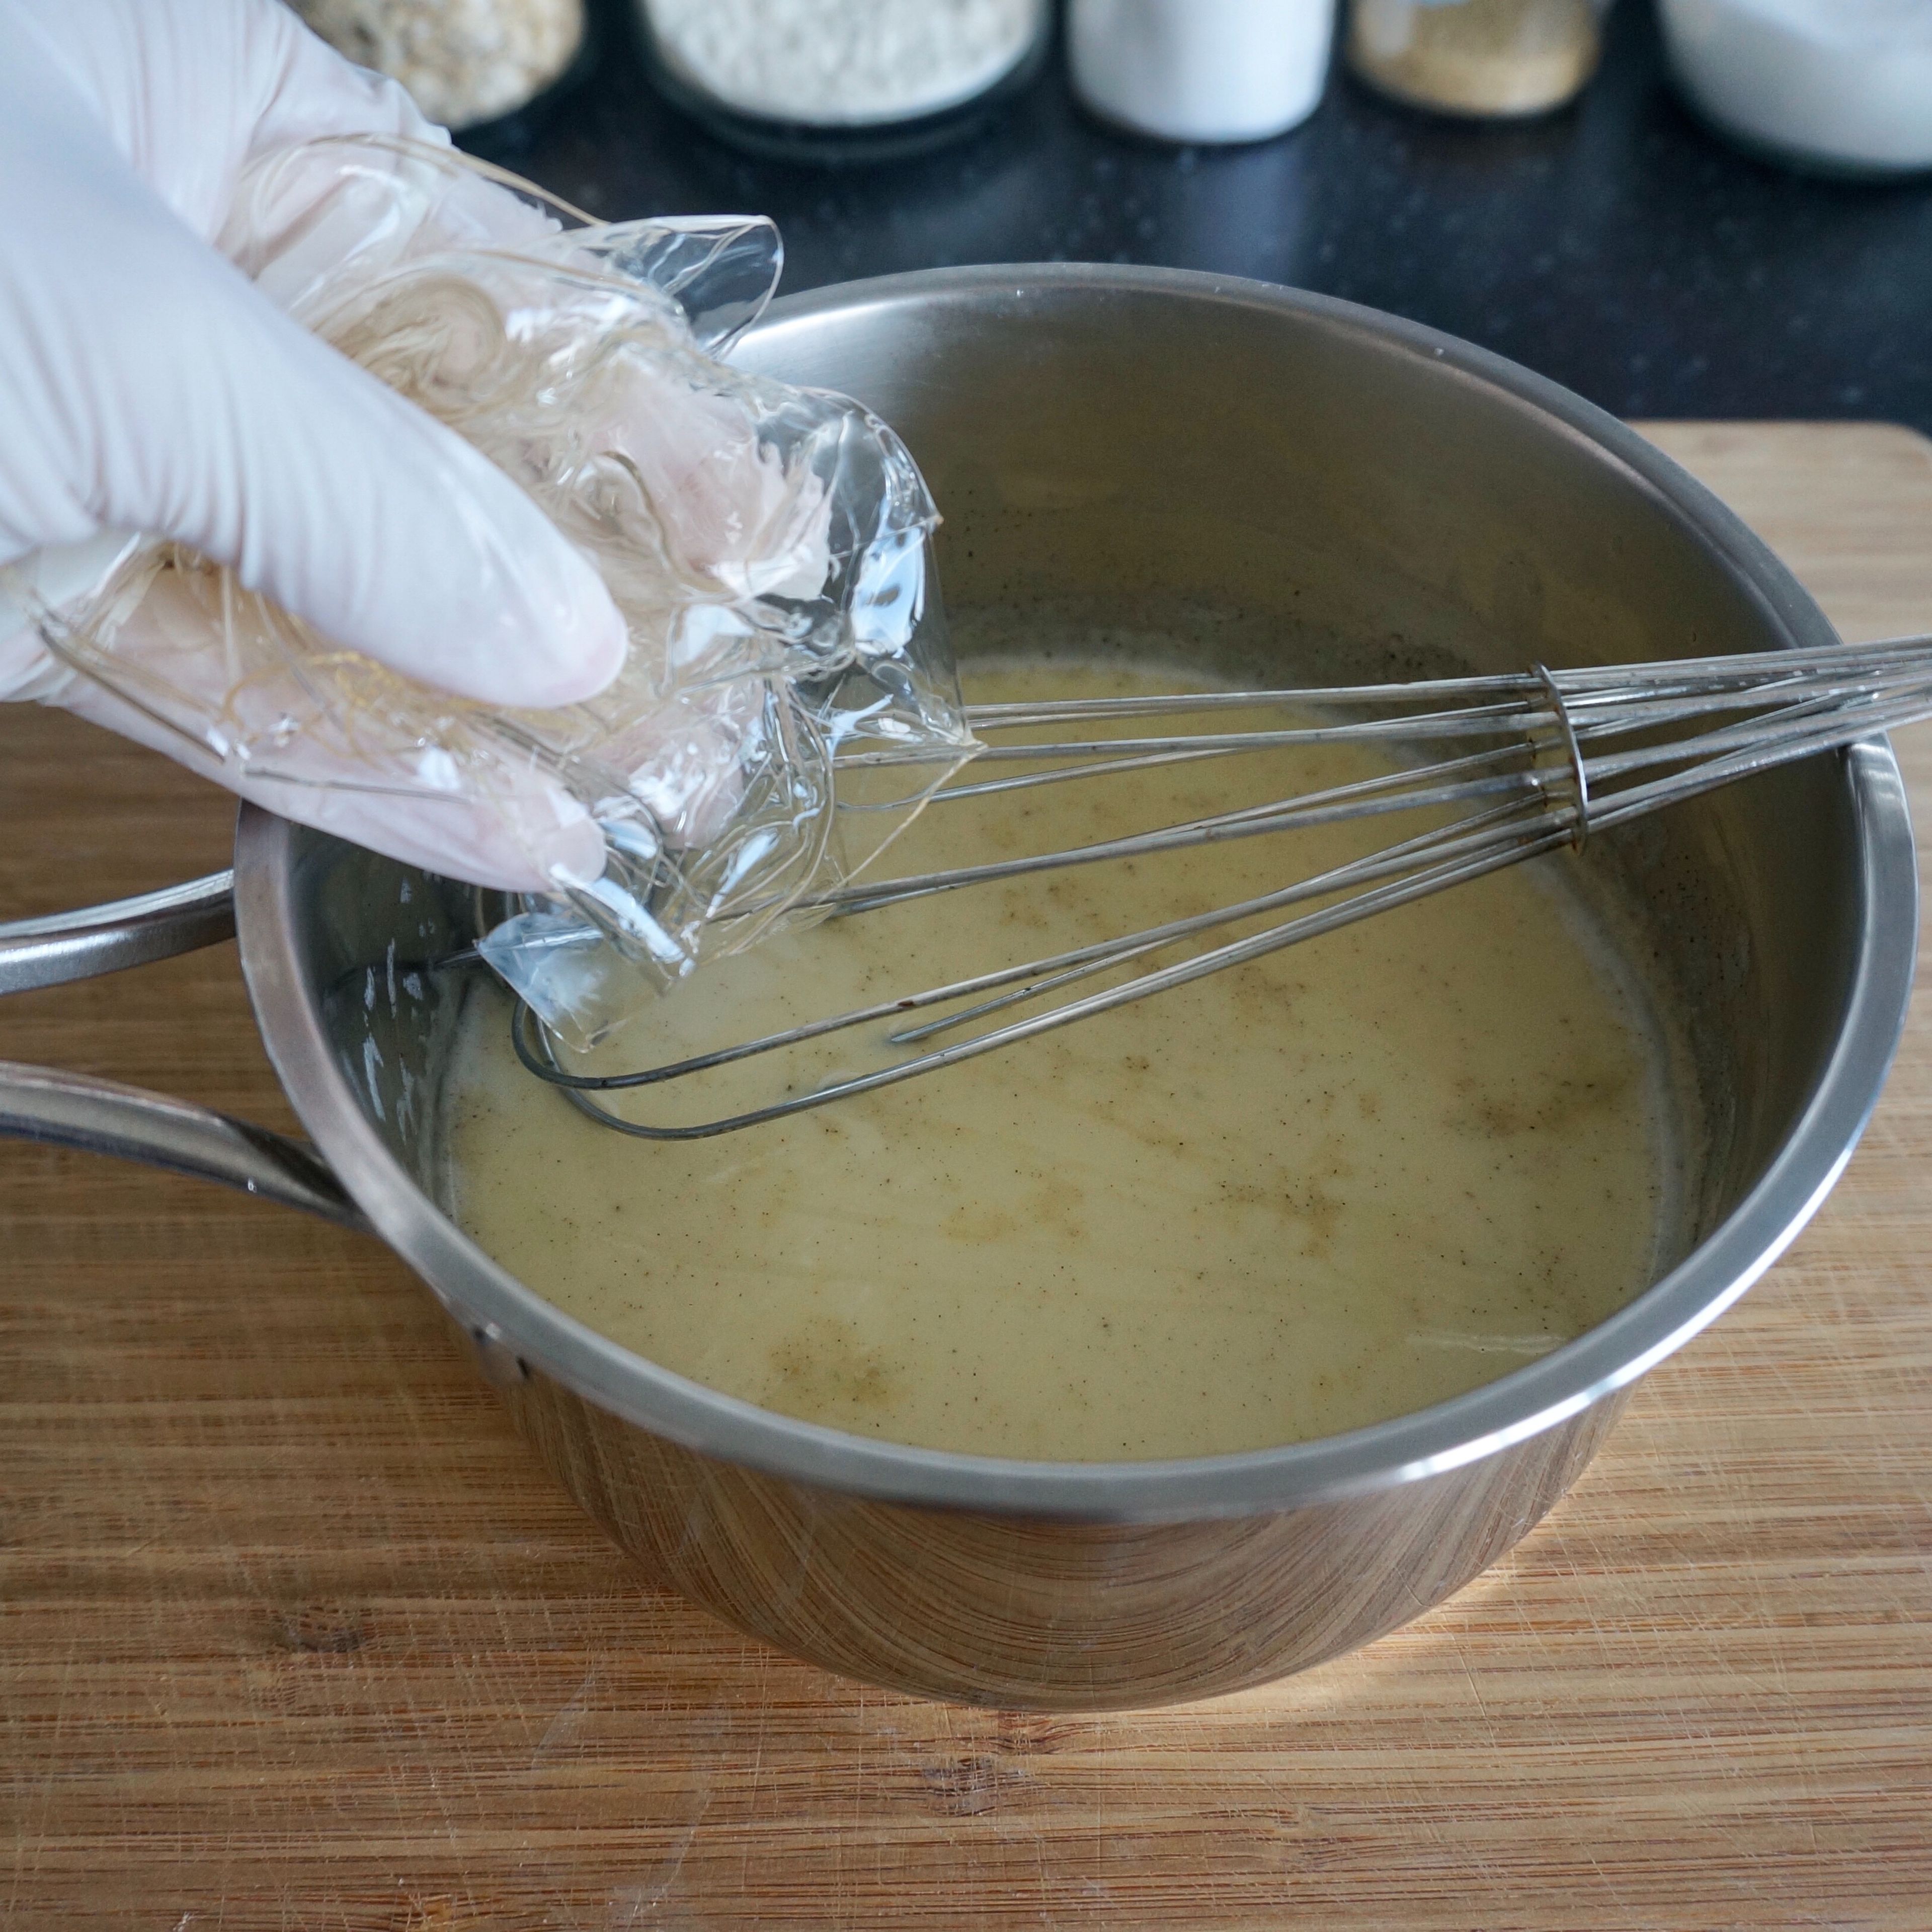 Stir in gelatin and immediately whisk gently (so there are no bubbles) until smooth and dissolved. 